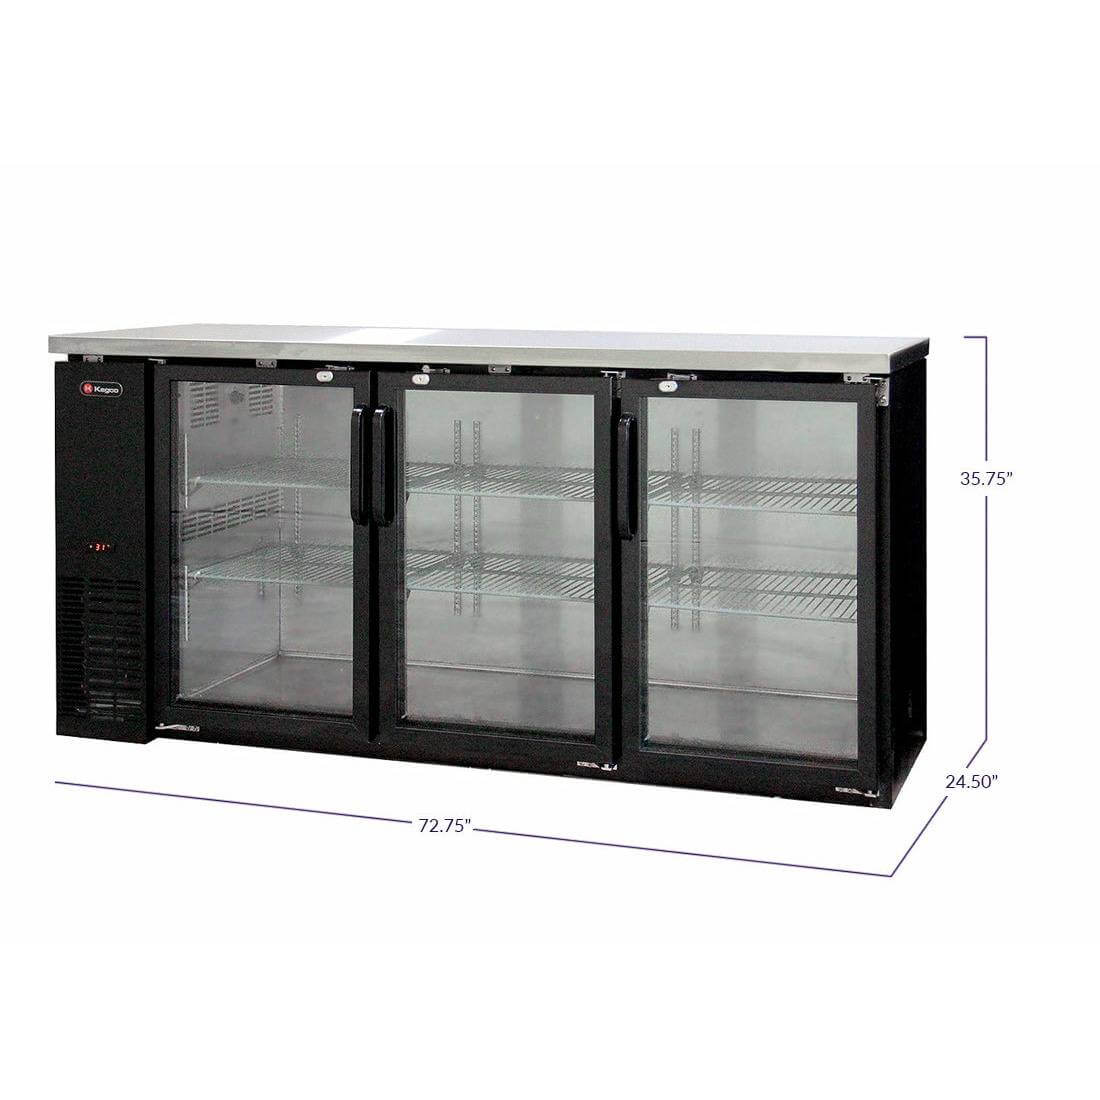 Kegco Commercial Back Bar Cooler with Three Glass Doors